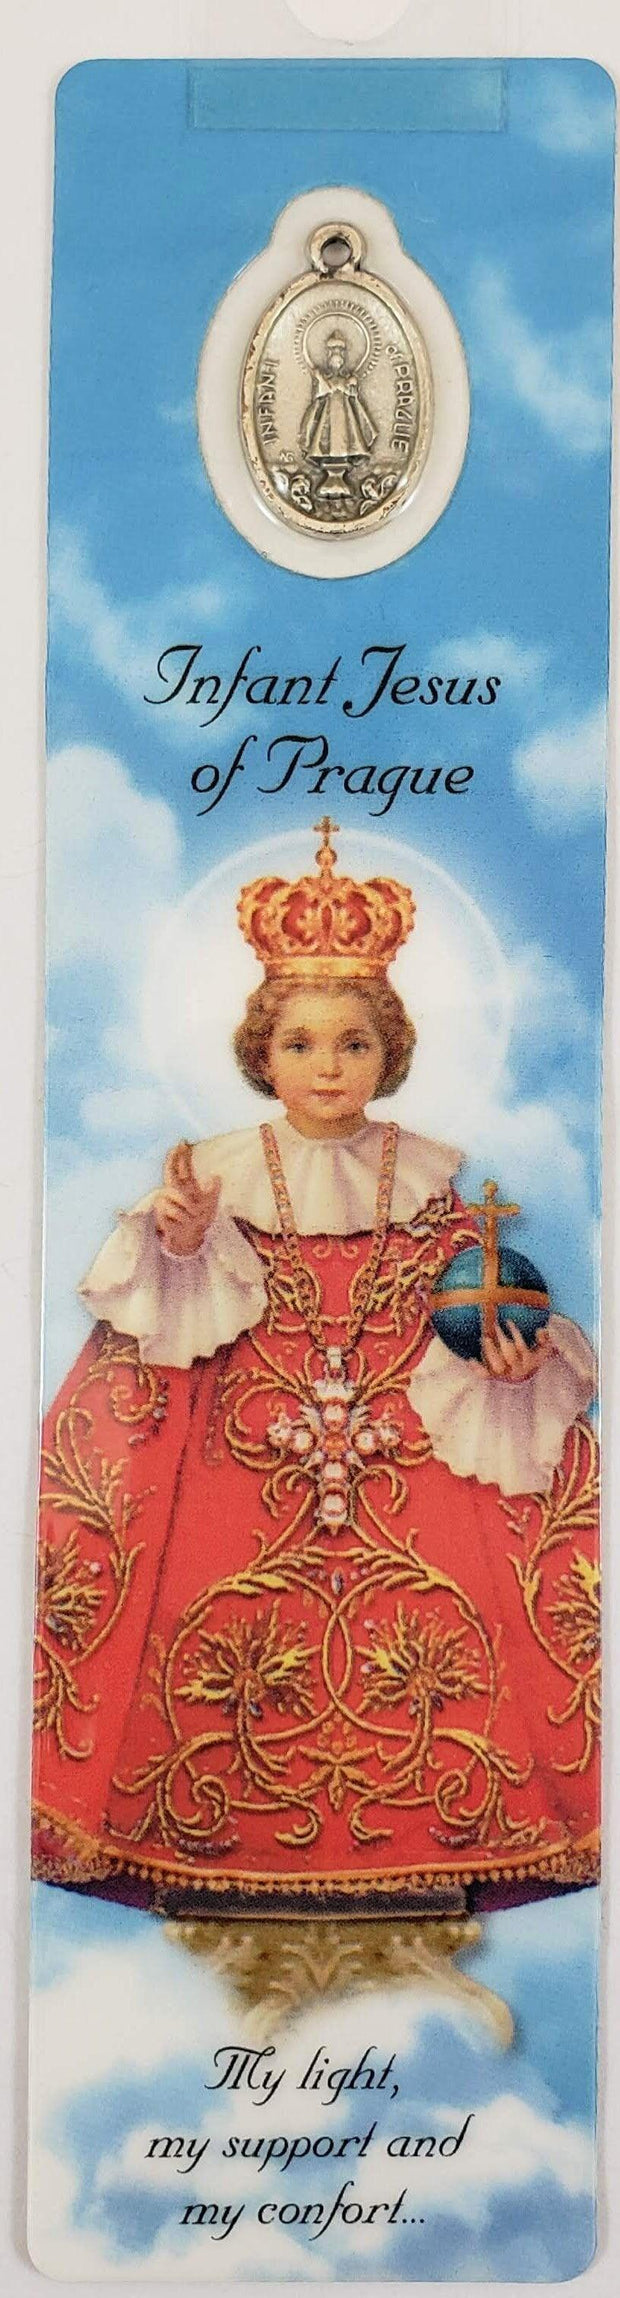 Infant Jesus of Prague Bookmark with Medal - Marian Devotional Movement